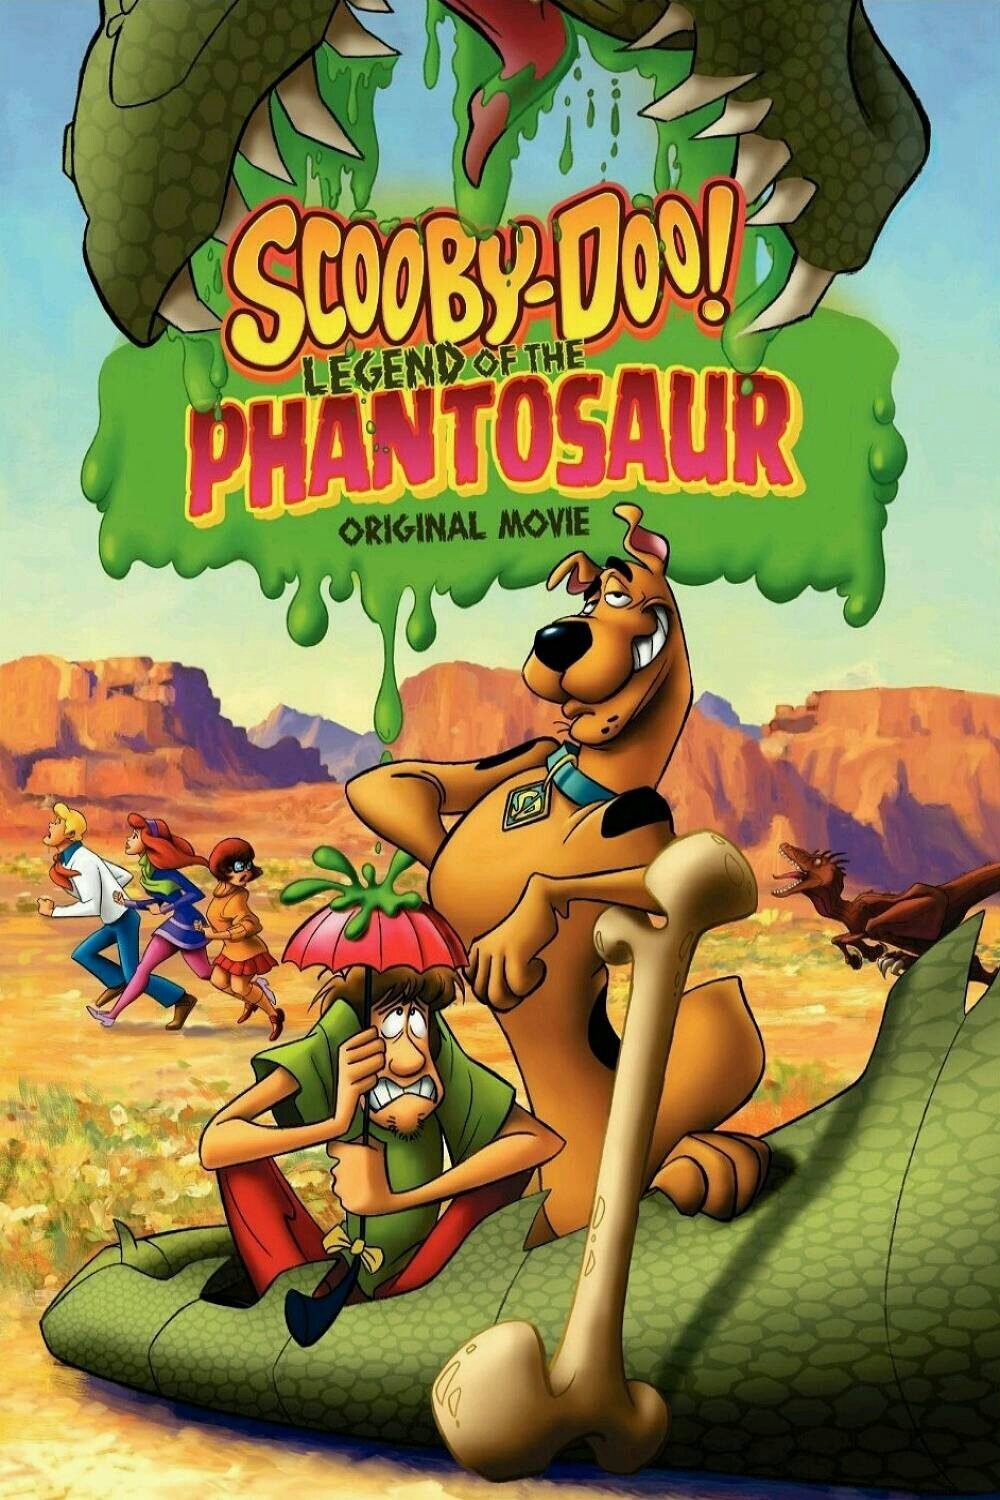 Scooby-Doo! Legend of the Phantosaur Picture